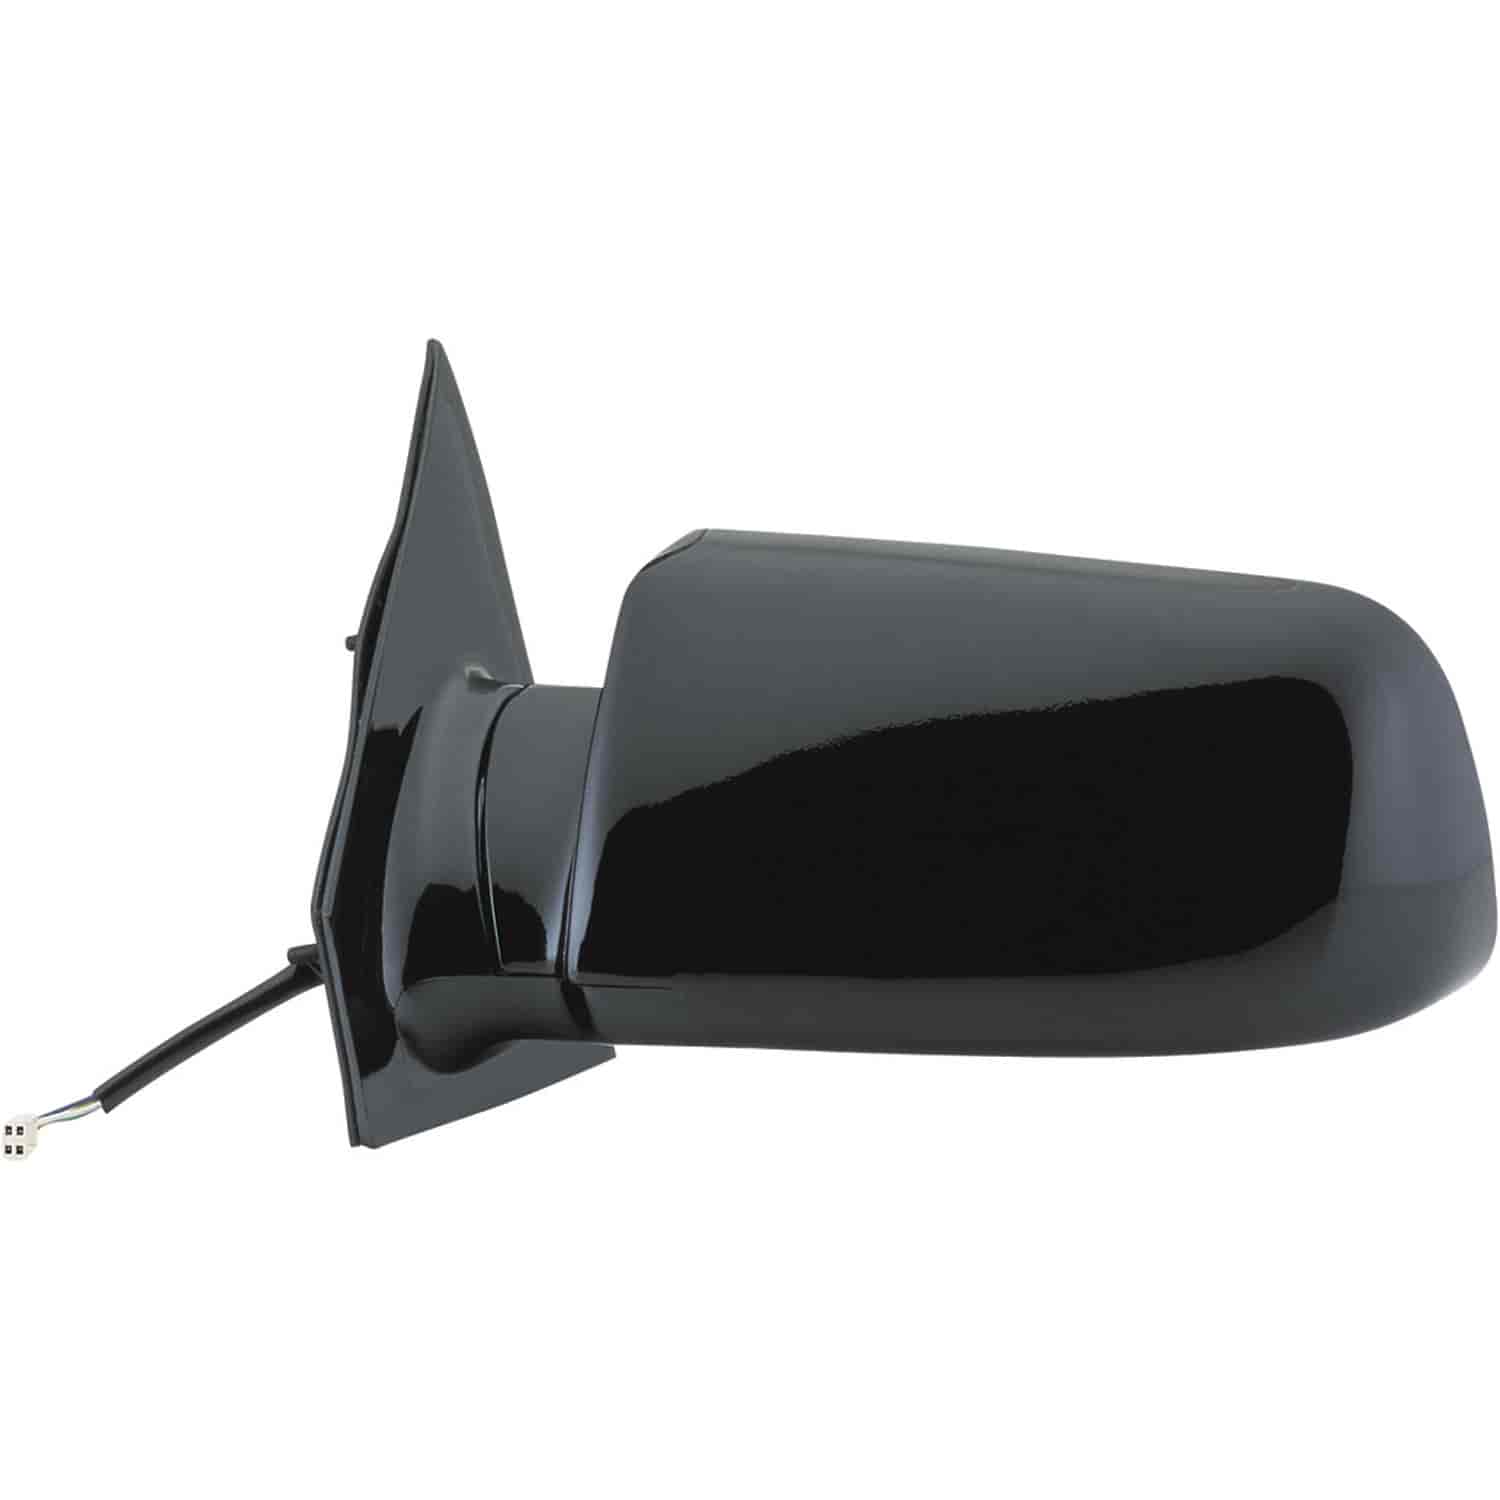 OEM Style Replacement mirror for 99 Chevy Astro Van GMC Safari Van driver side mirror tested to fit